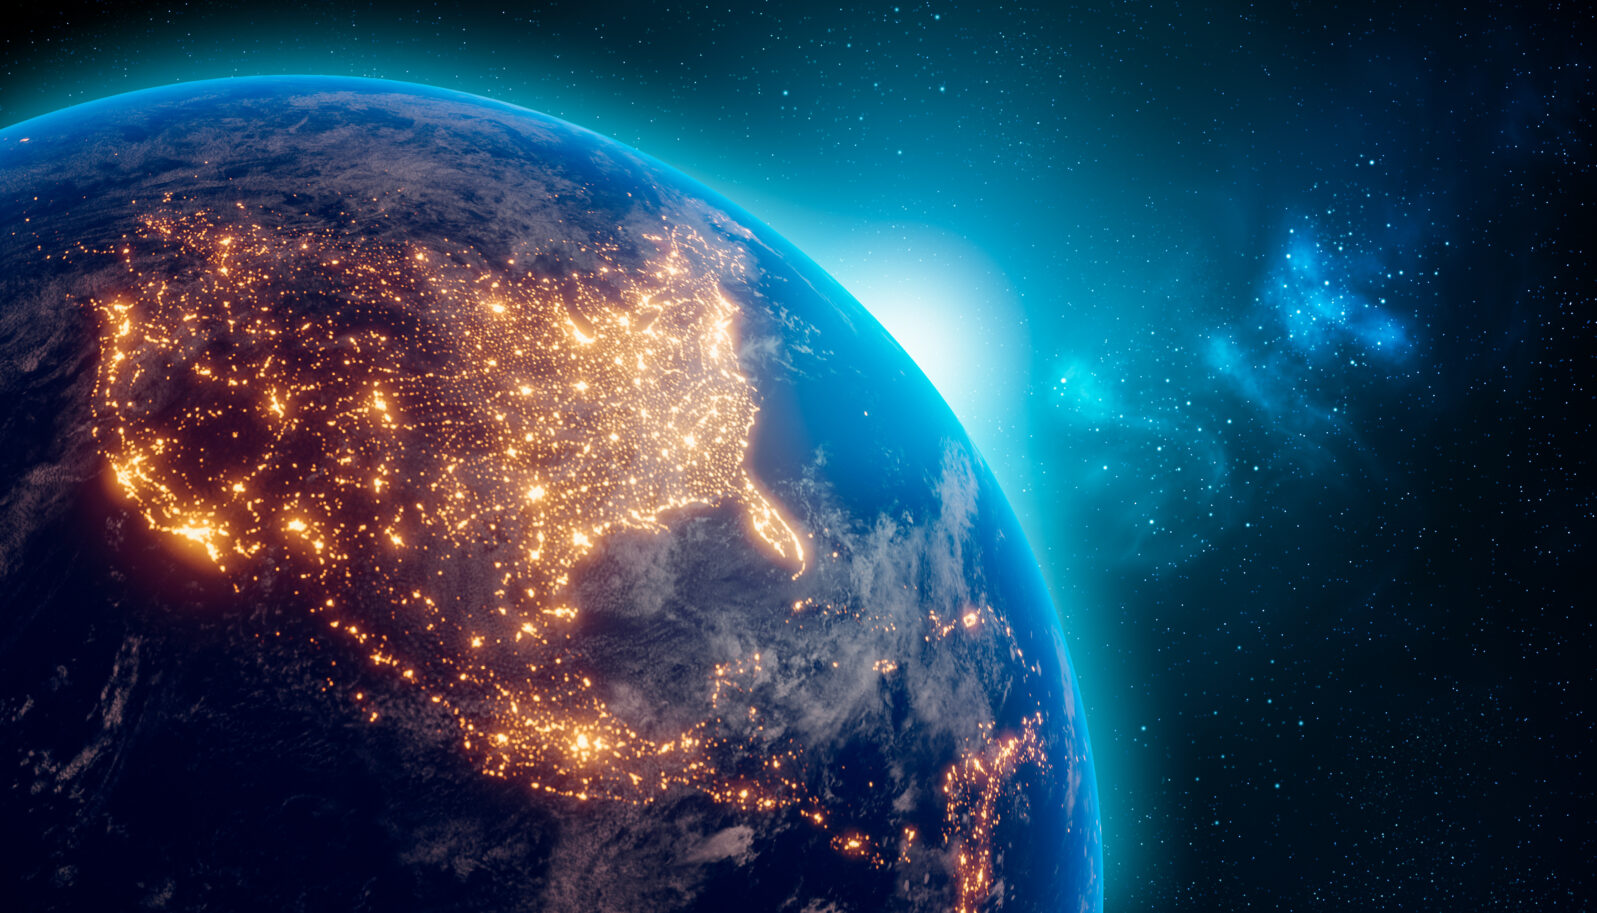 Earth at night from outer space with city lights on North America continent. 3D rendering illustration. Earth map texture provided by Nasa. Energy consumption, electricity, industry, ecology concepts.